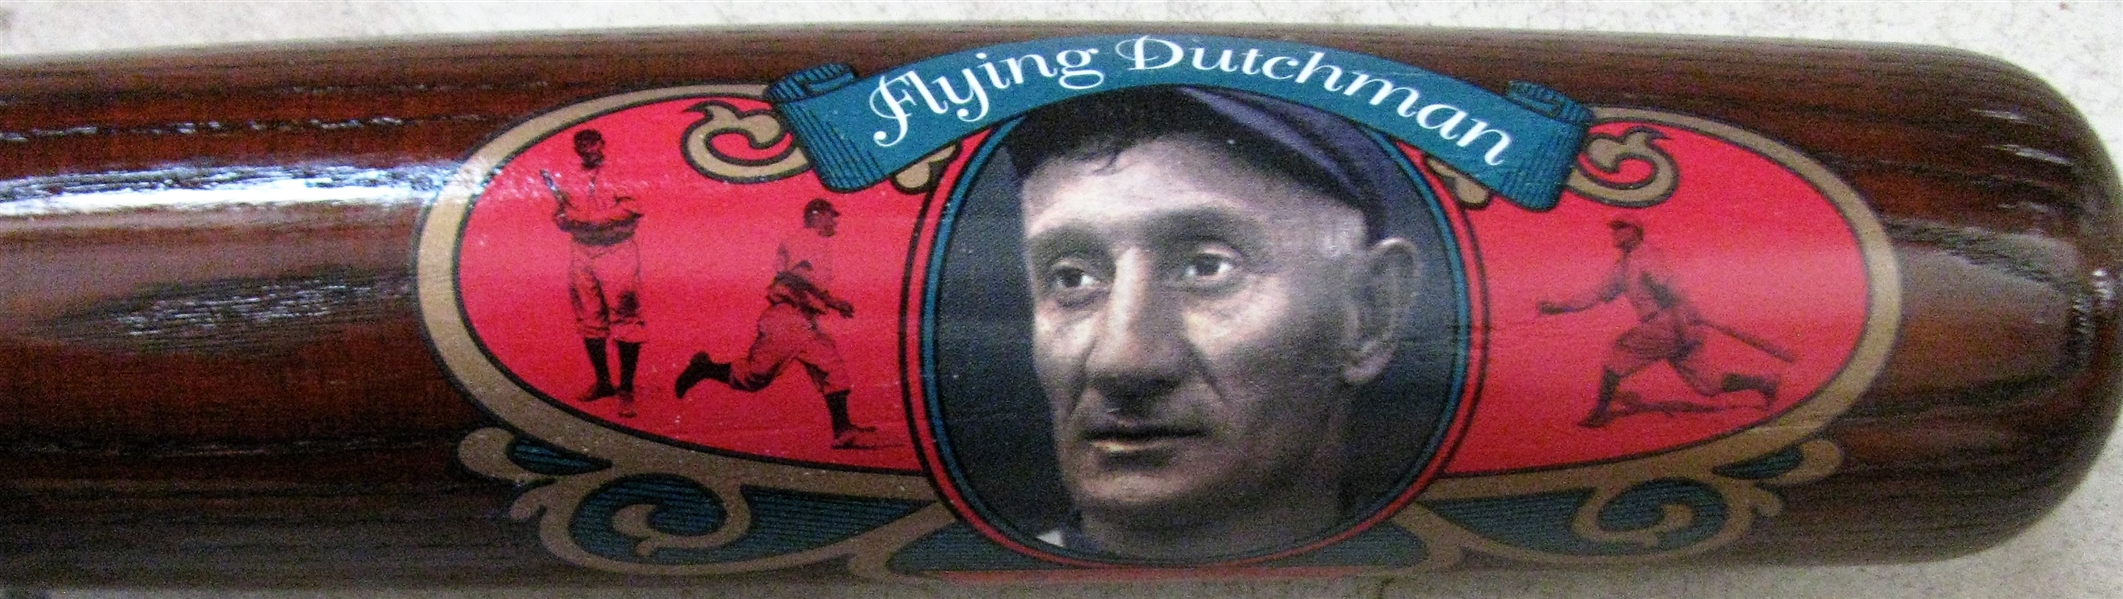 HONUS WAGNER COOPERSTOWN LE PICTURE BAT 